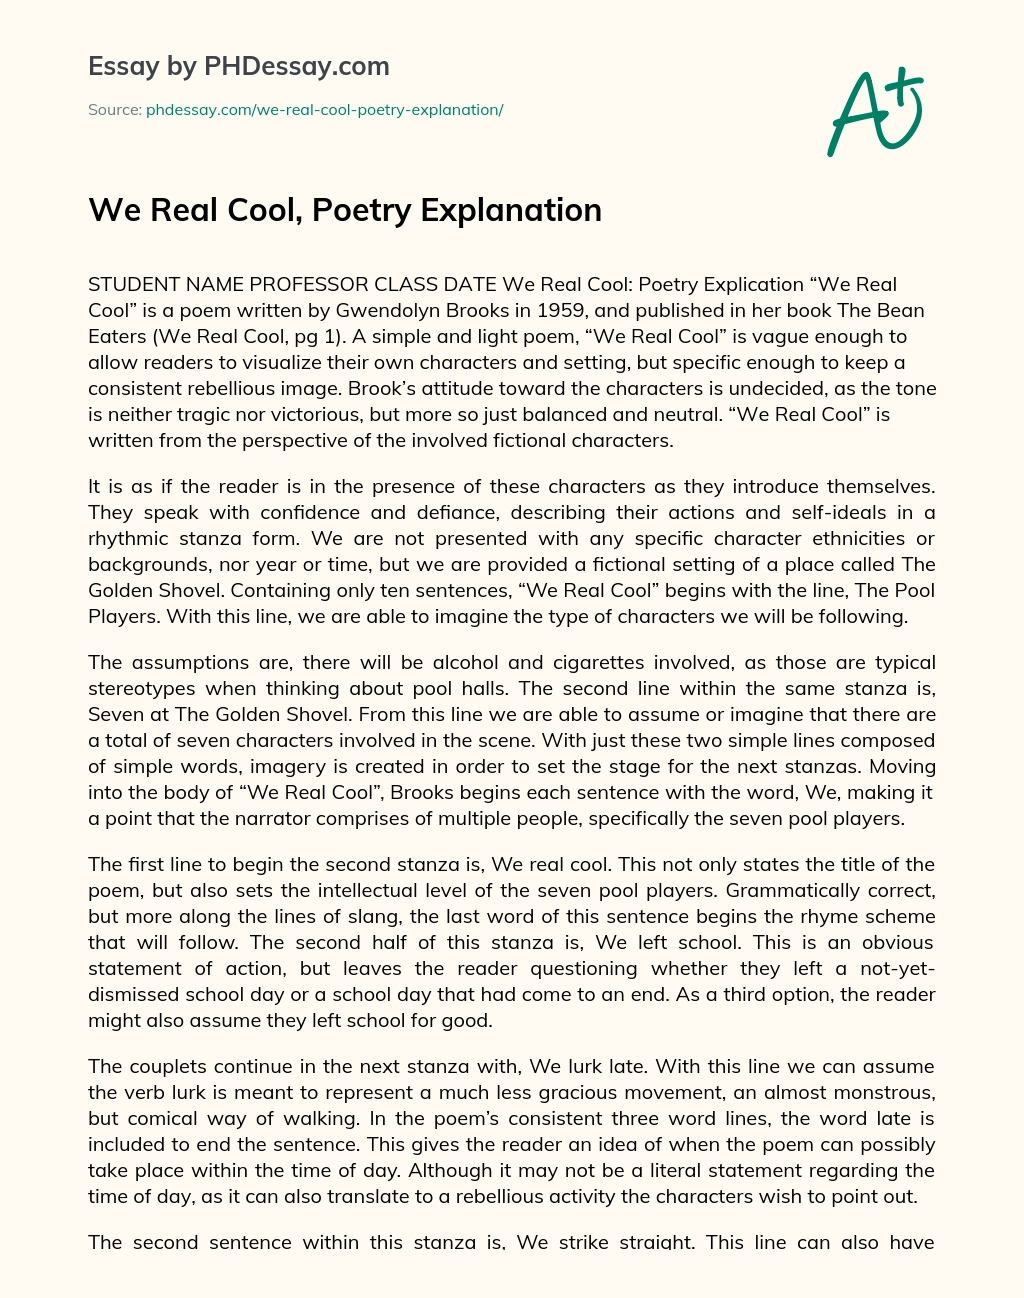 We Real Cool, Poetry Explanation essay